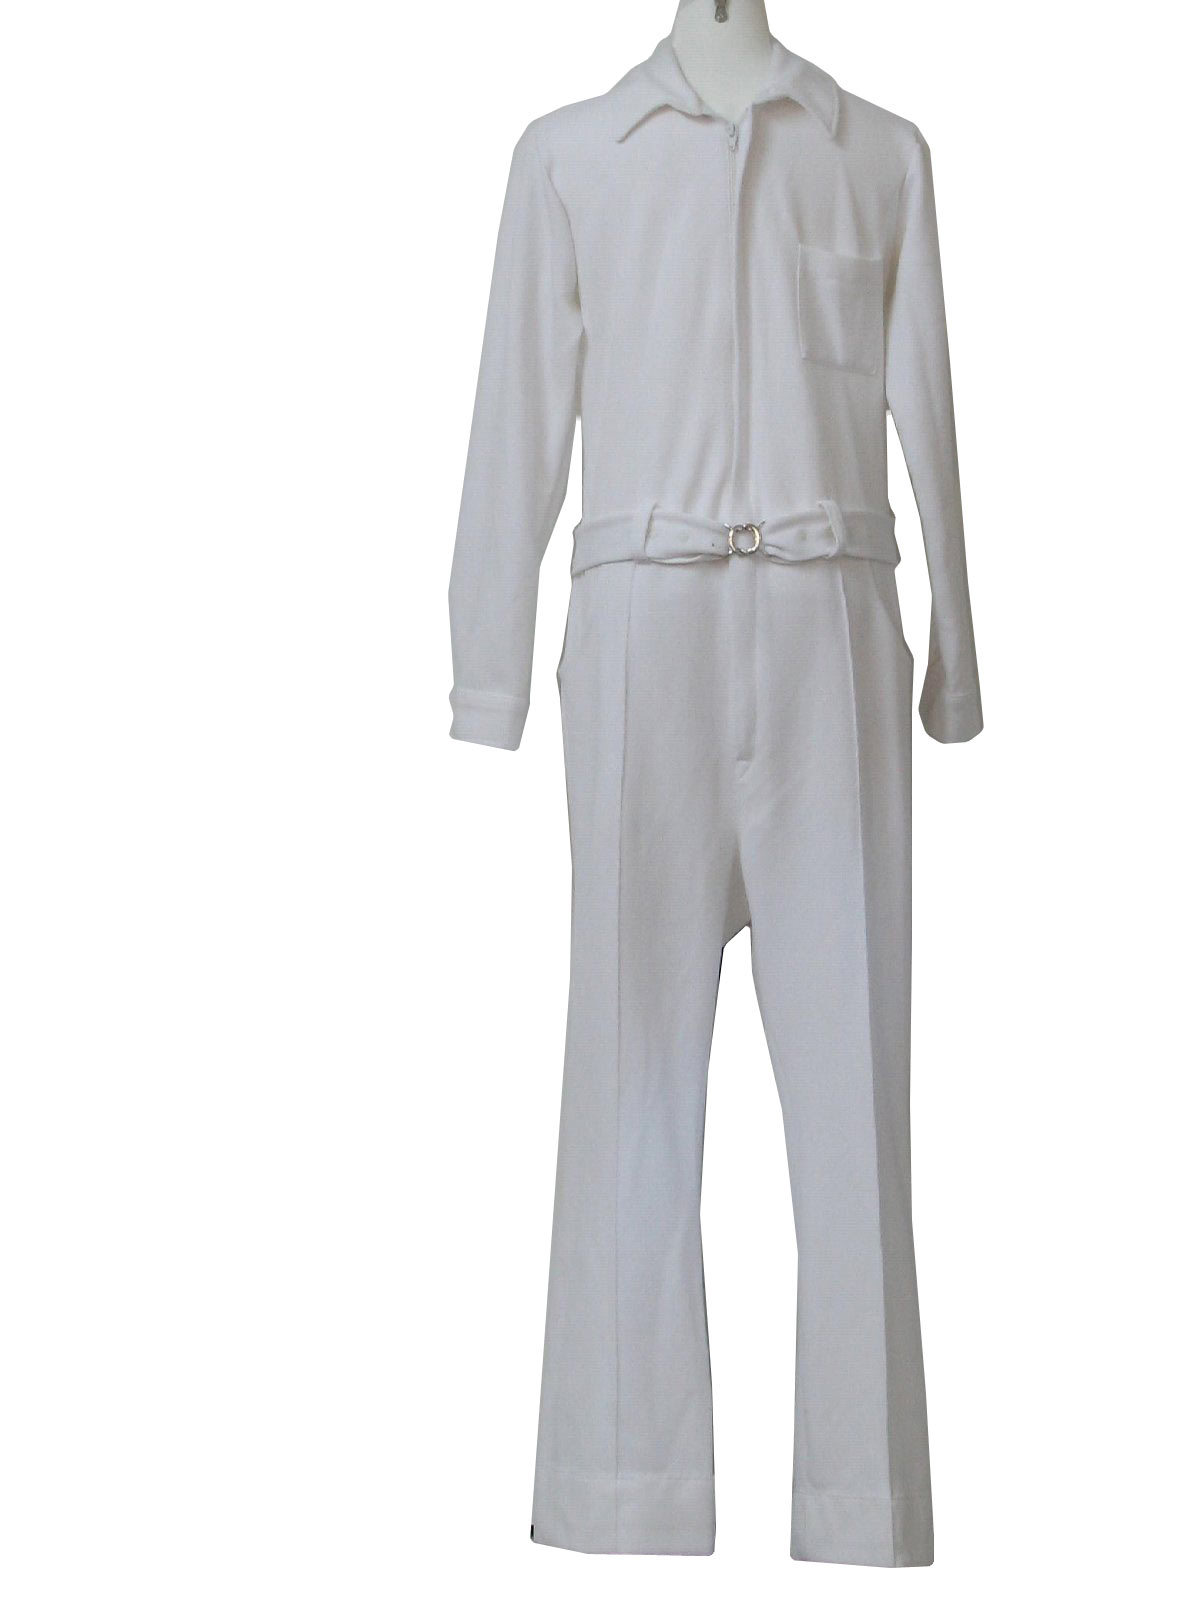 Vintage 70s Suit: 70s -LeVoys- Mens solid white double knit polyester ...